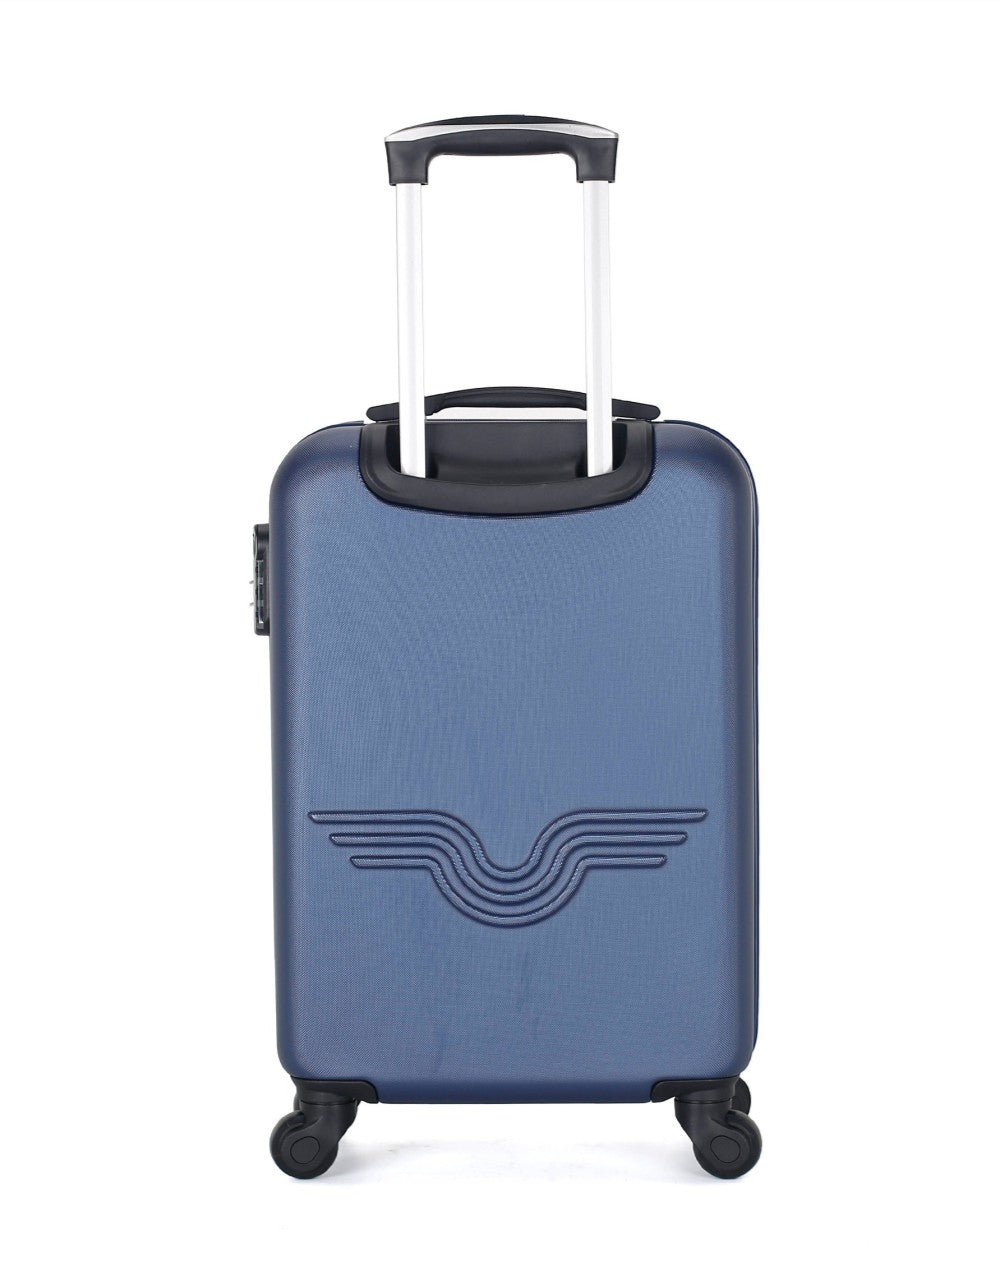 Valise Cabine ABS QUEENS 4 Roues 55 cm